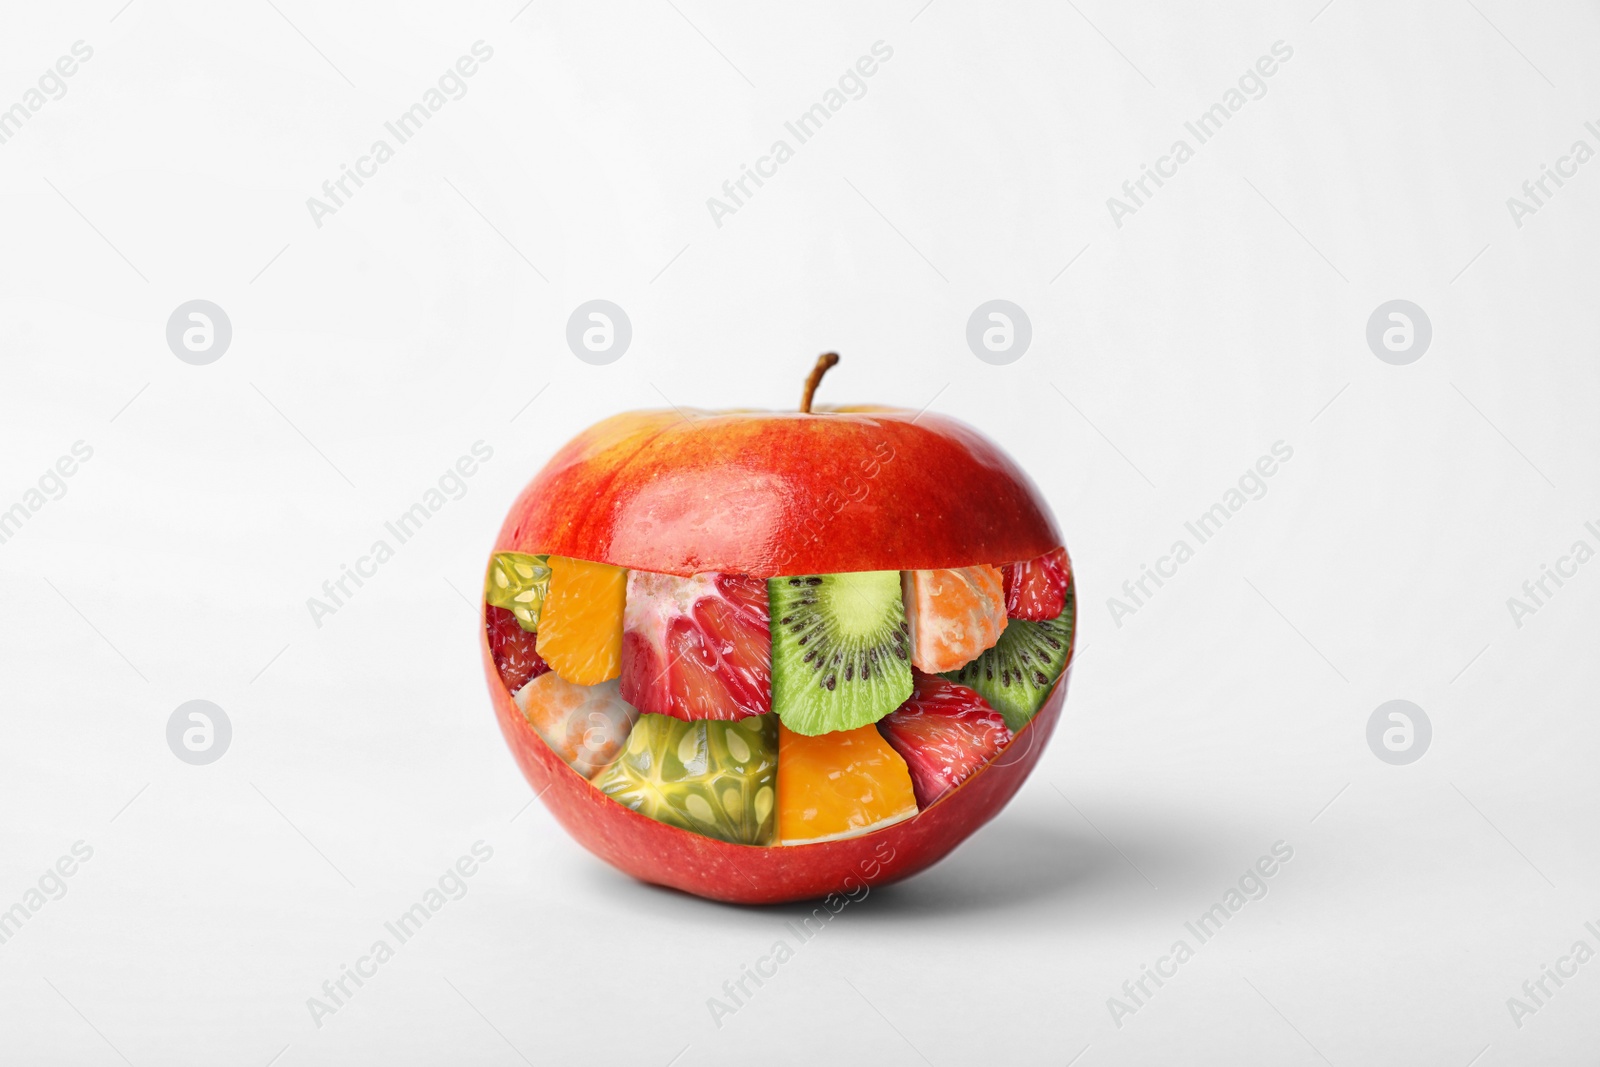 Image of GMO concept. Fresh ripe apple and pieces of different fruits inside of it